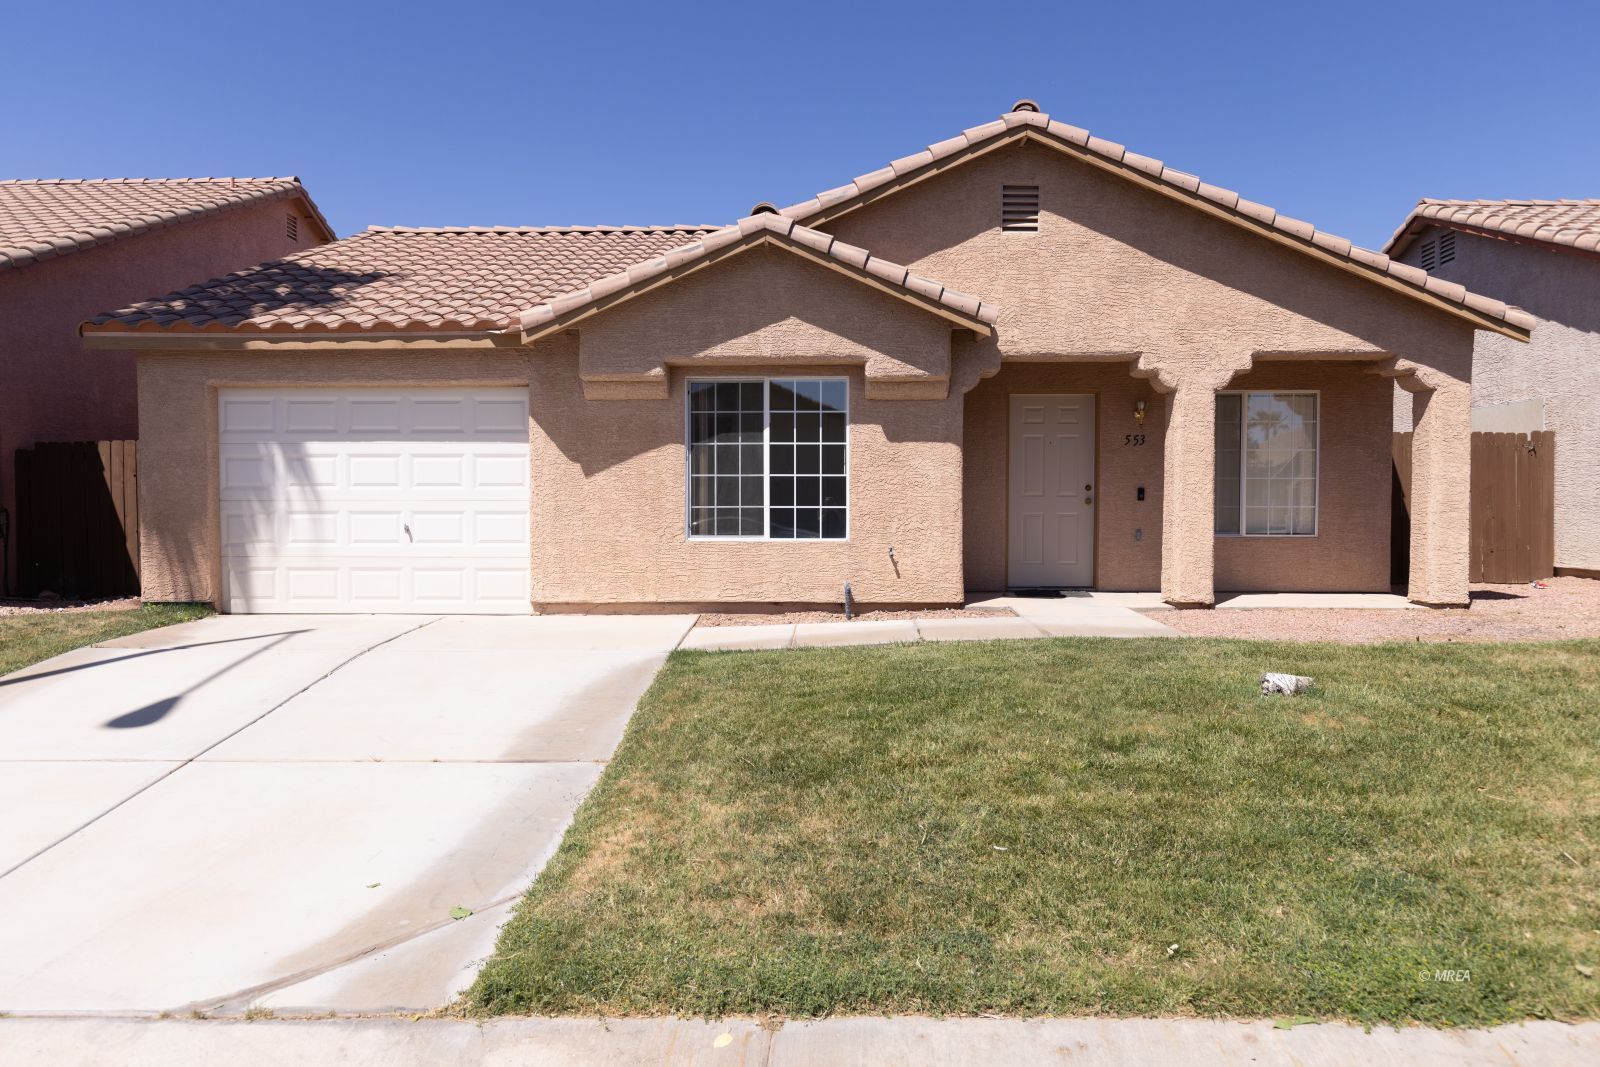 553 Lonesome Dove Dr, Mesquite NV 89027